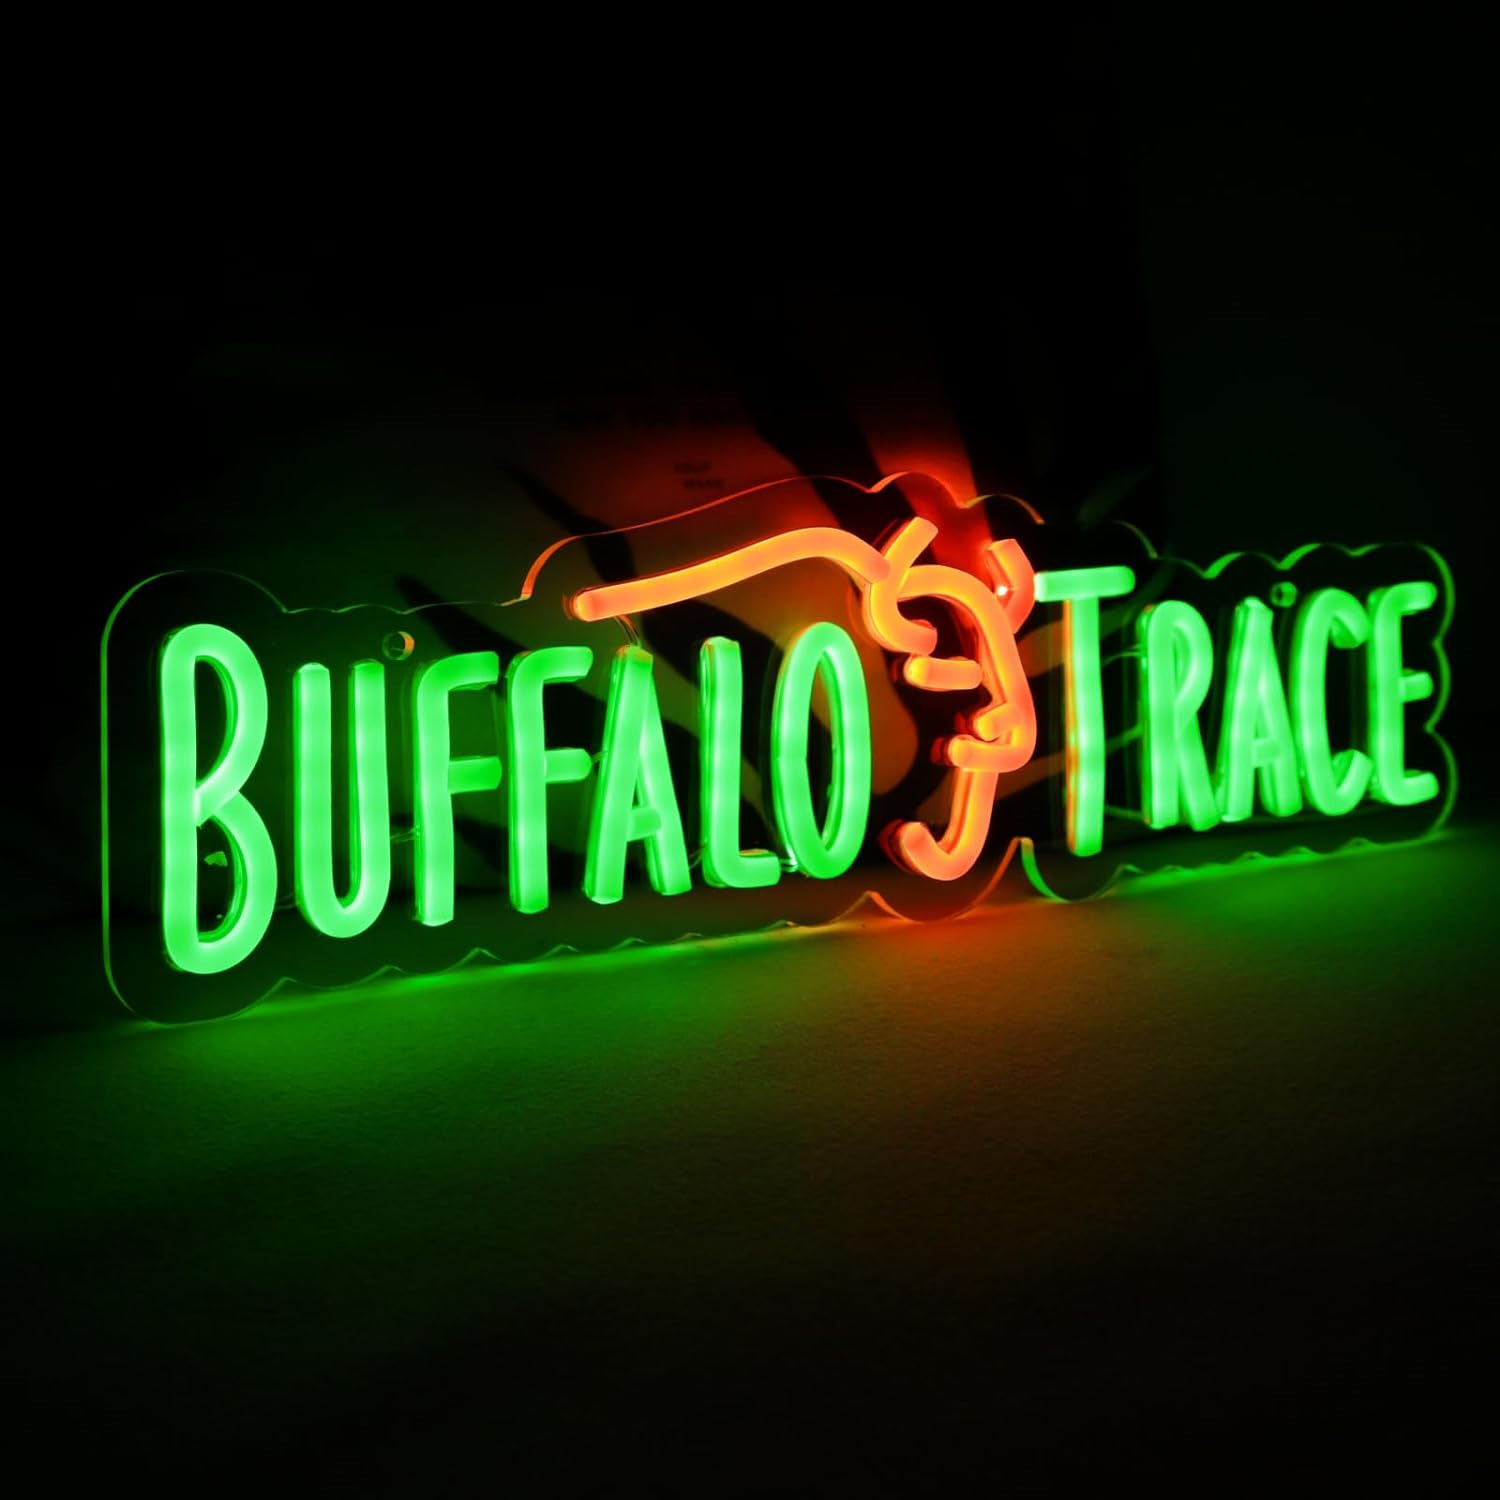 Buffalo Trace Neon Sign for Bourbon Whiskey in Bar Pub Man Cave or Party,Bright 